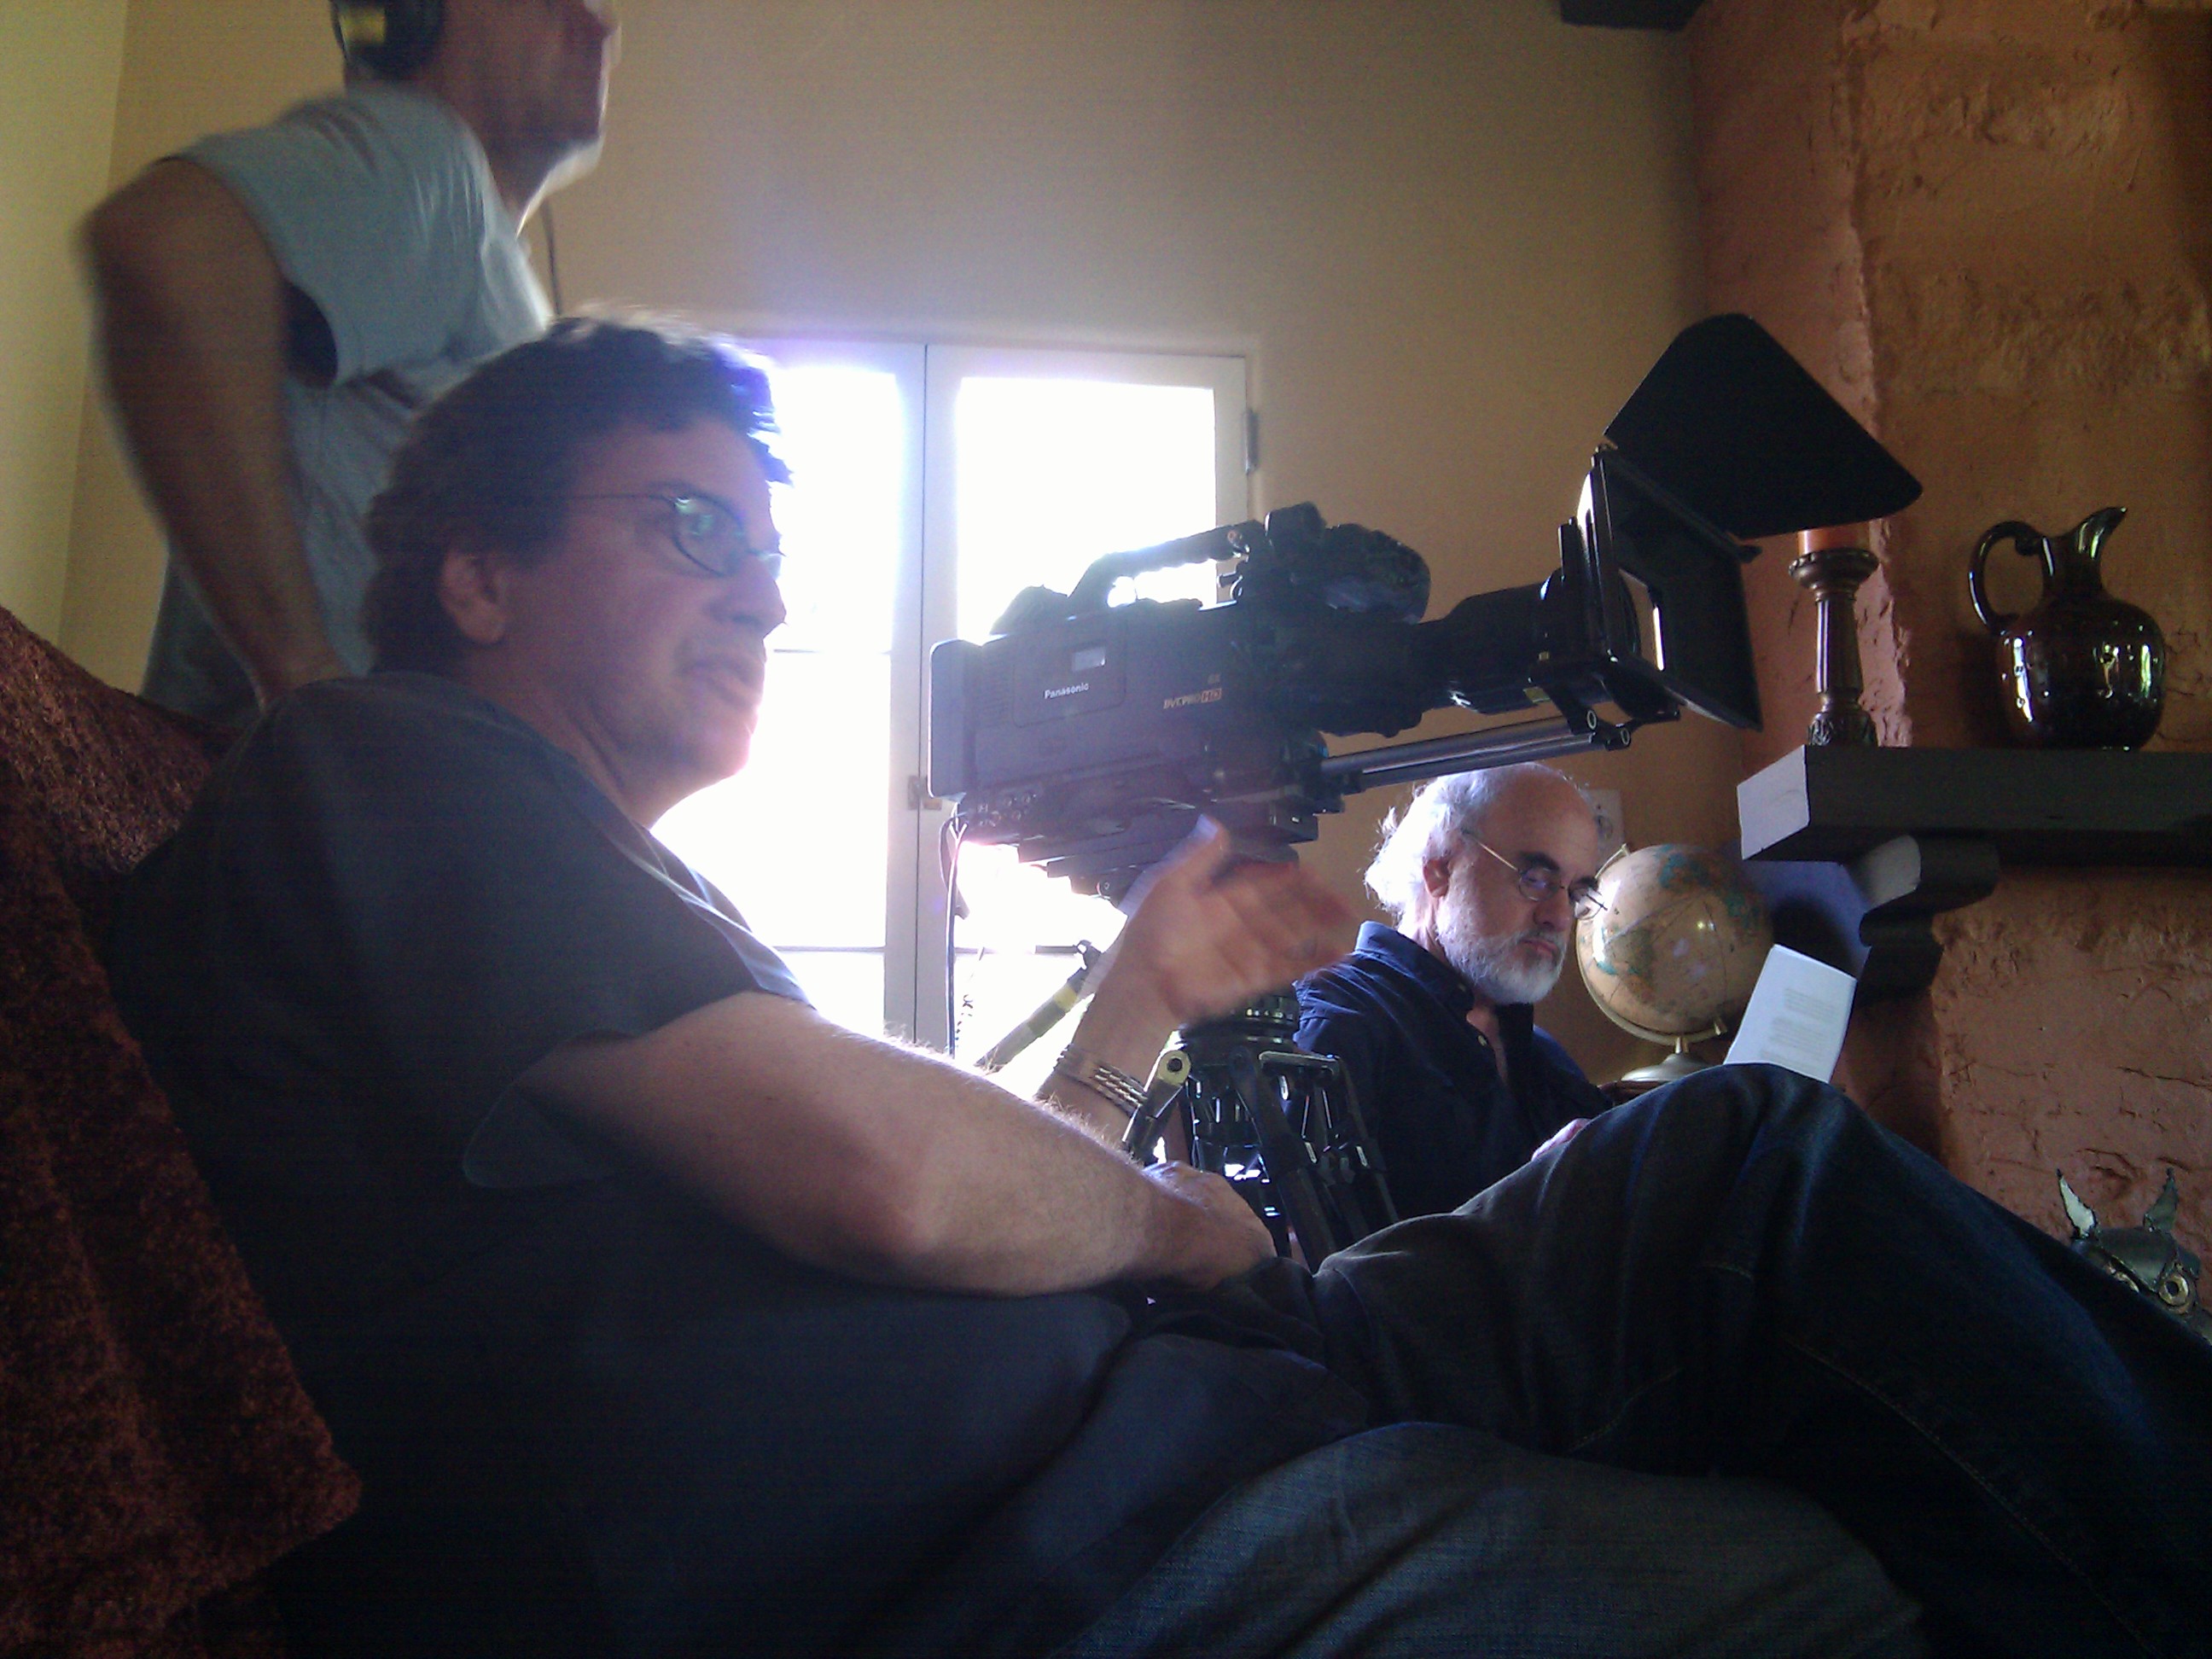 Producer Randy Bellous with Director William Sachs shooting a documentary